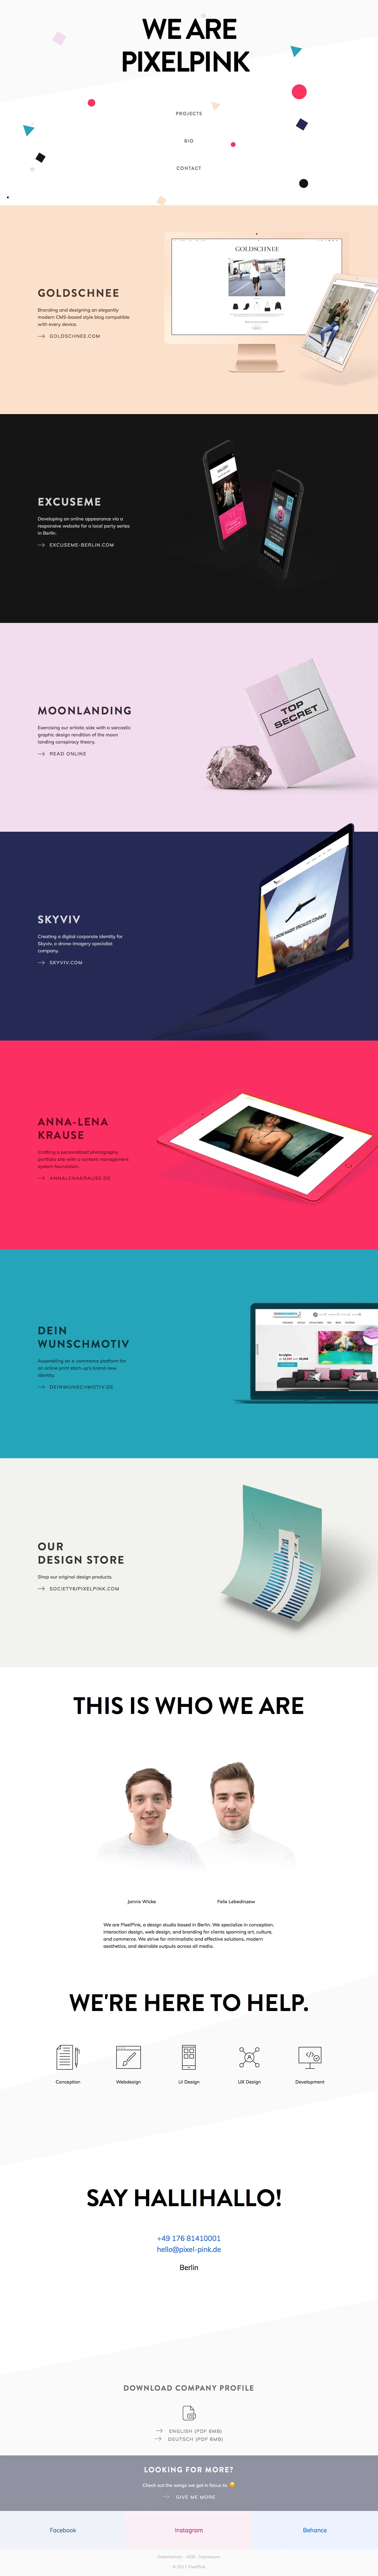 PixelPink Landing Page Example: Design Studio based in Berlin creating digital Products focusing on simplicity.